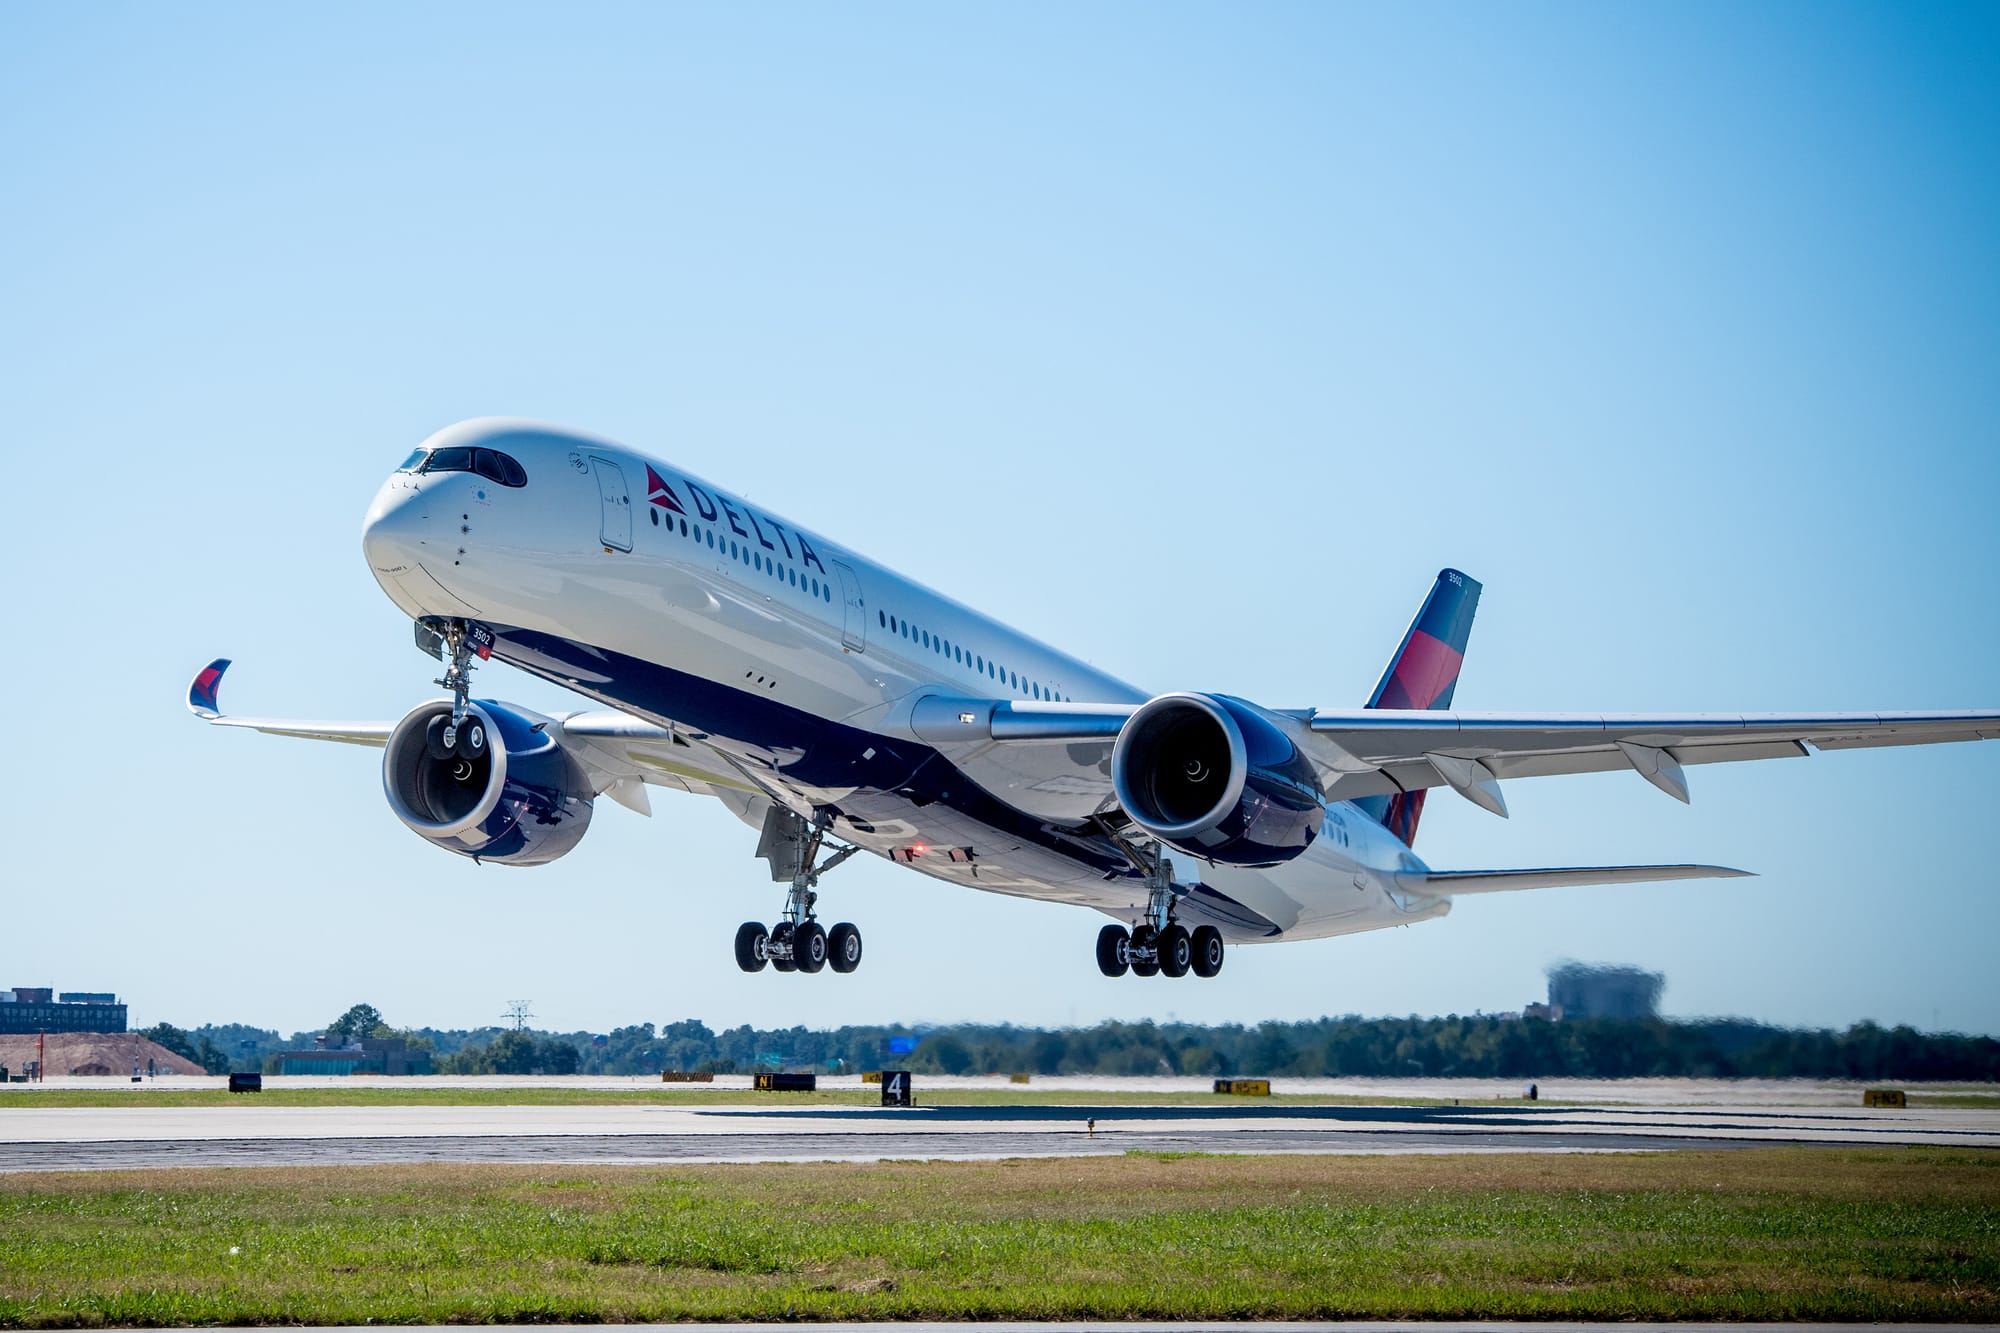                      Delta’s Next A350 Delivery Will Be a Team USA Livery                             
                     